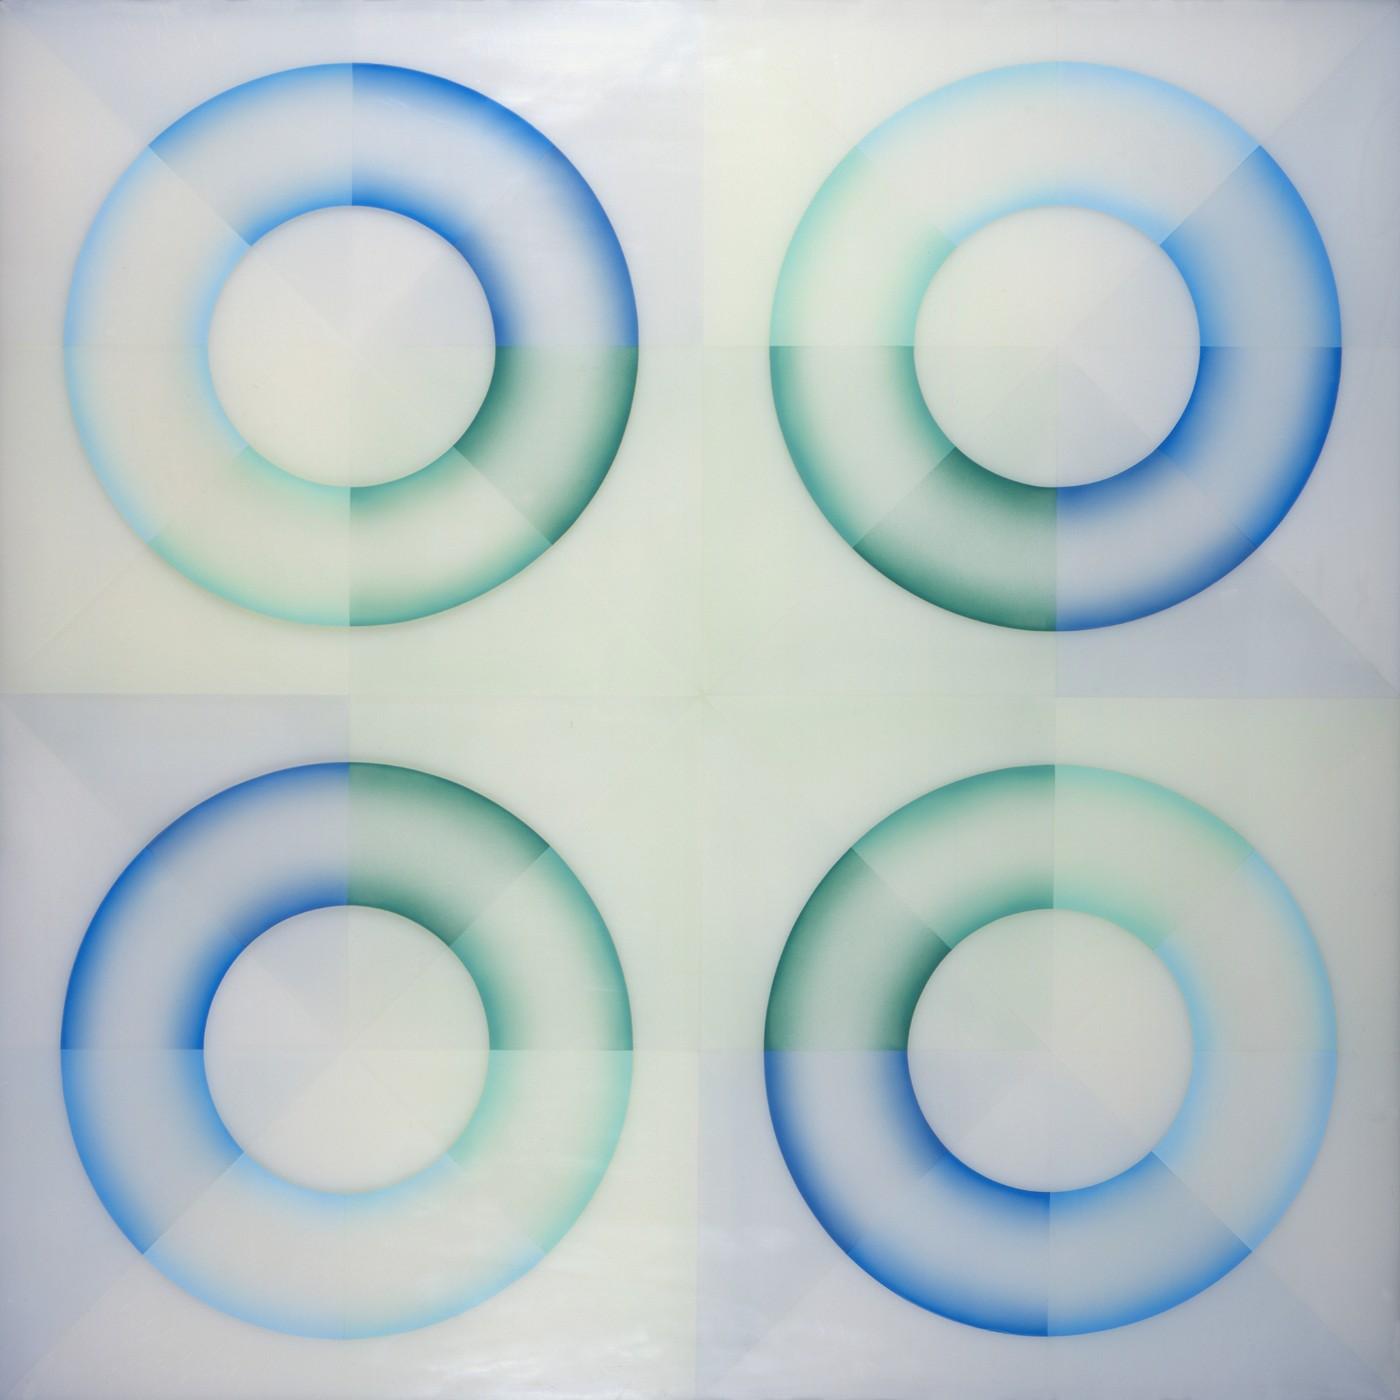 Judy Chicago, Pasadena Lifesavers Blue Series #2,1969-1970. Sprayed acrylic lacquer on acrylic. Collection of Elizabeth A. Sackler.